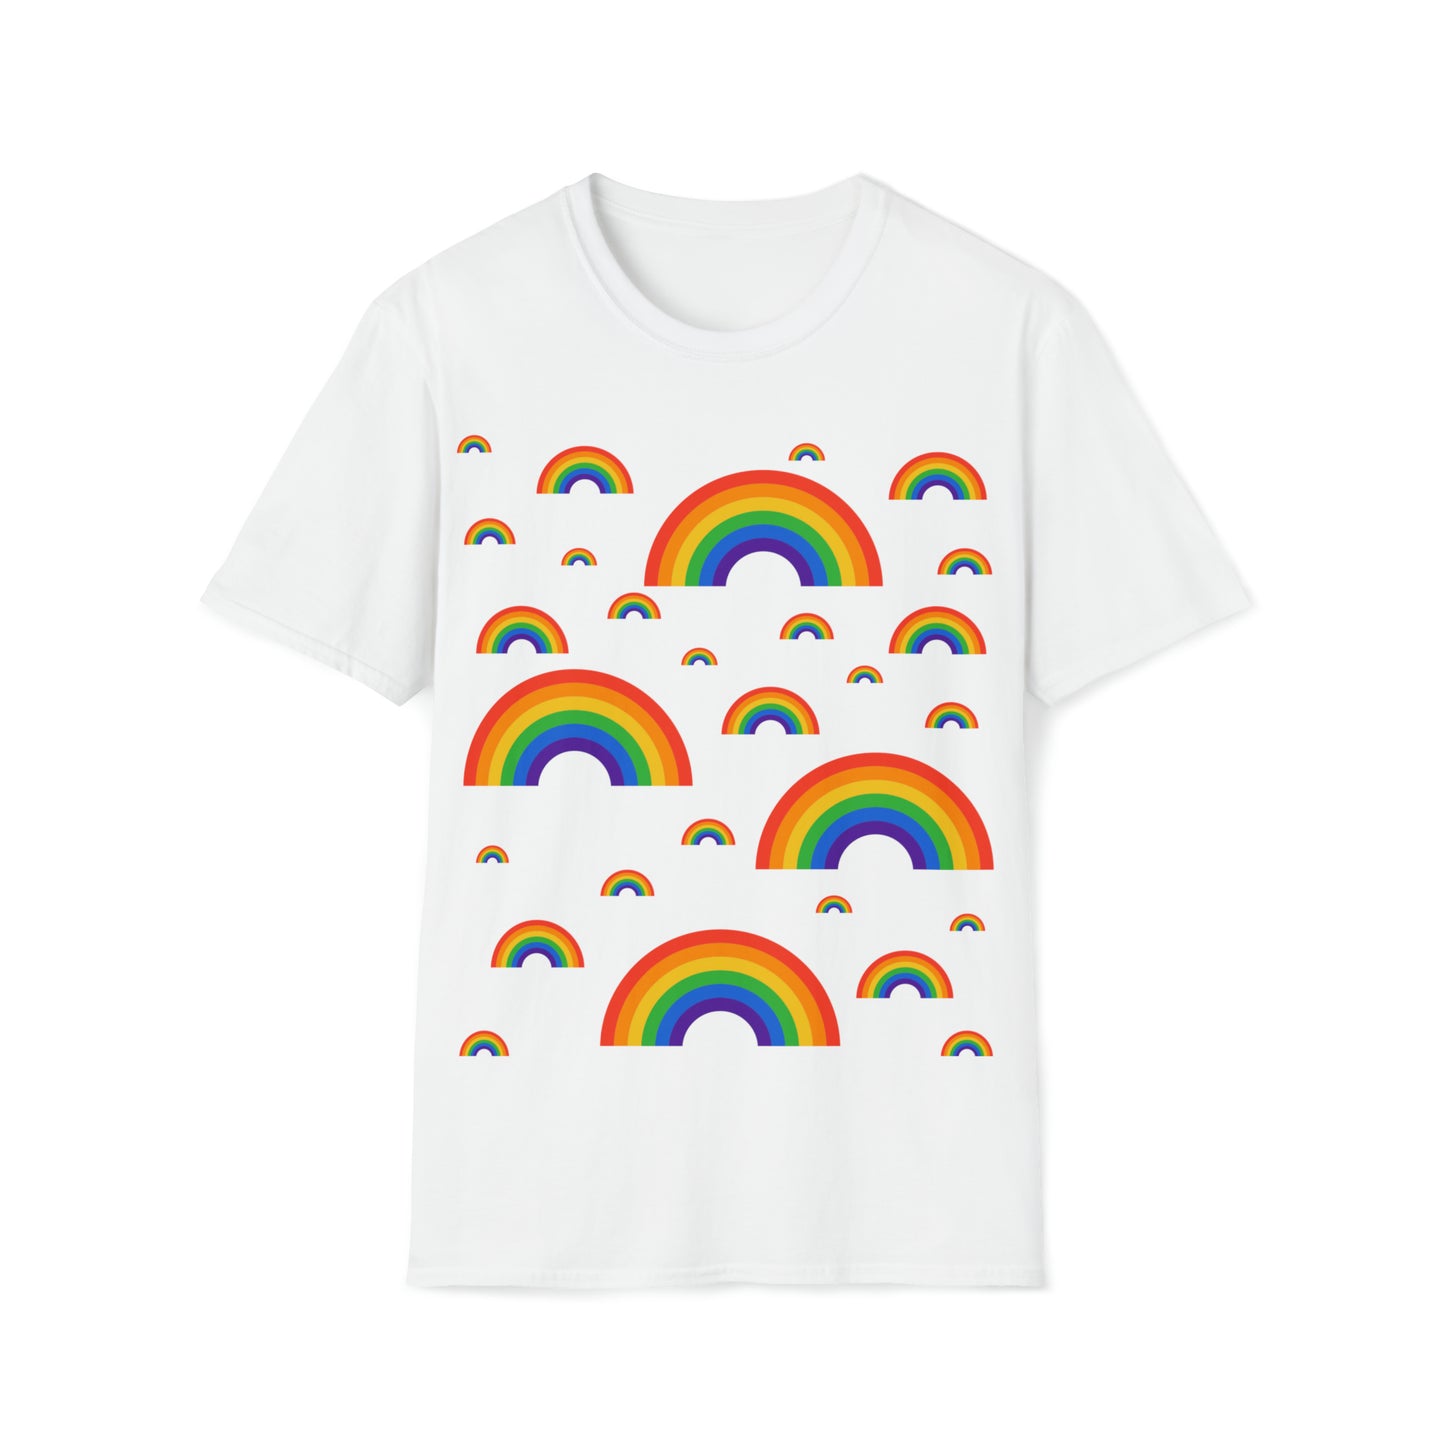 All The Rainbows Unisex Softstyle T-Shirt